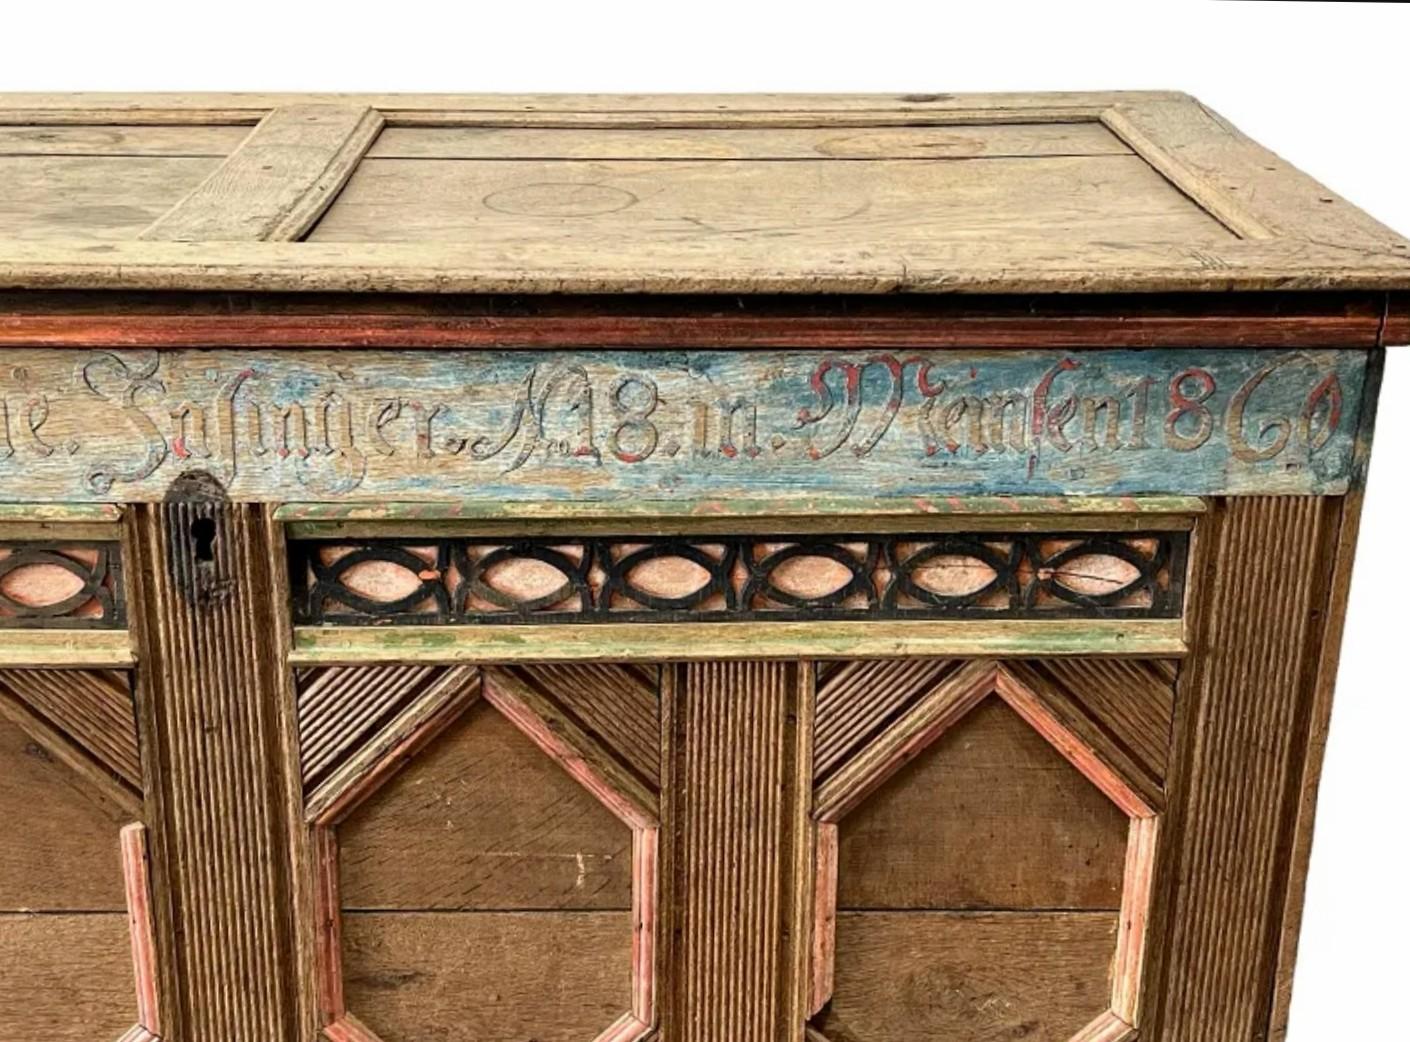 A rare, one-of-a-kind antique, circa 1860, country Swiss folk decorated wood immigrant's travel trunk.

Handmade in the Meilen region of Zürich, Switzerland, in the mid-19th century, crafted of solid oak and pine, rectangular steamer chest form with